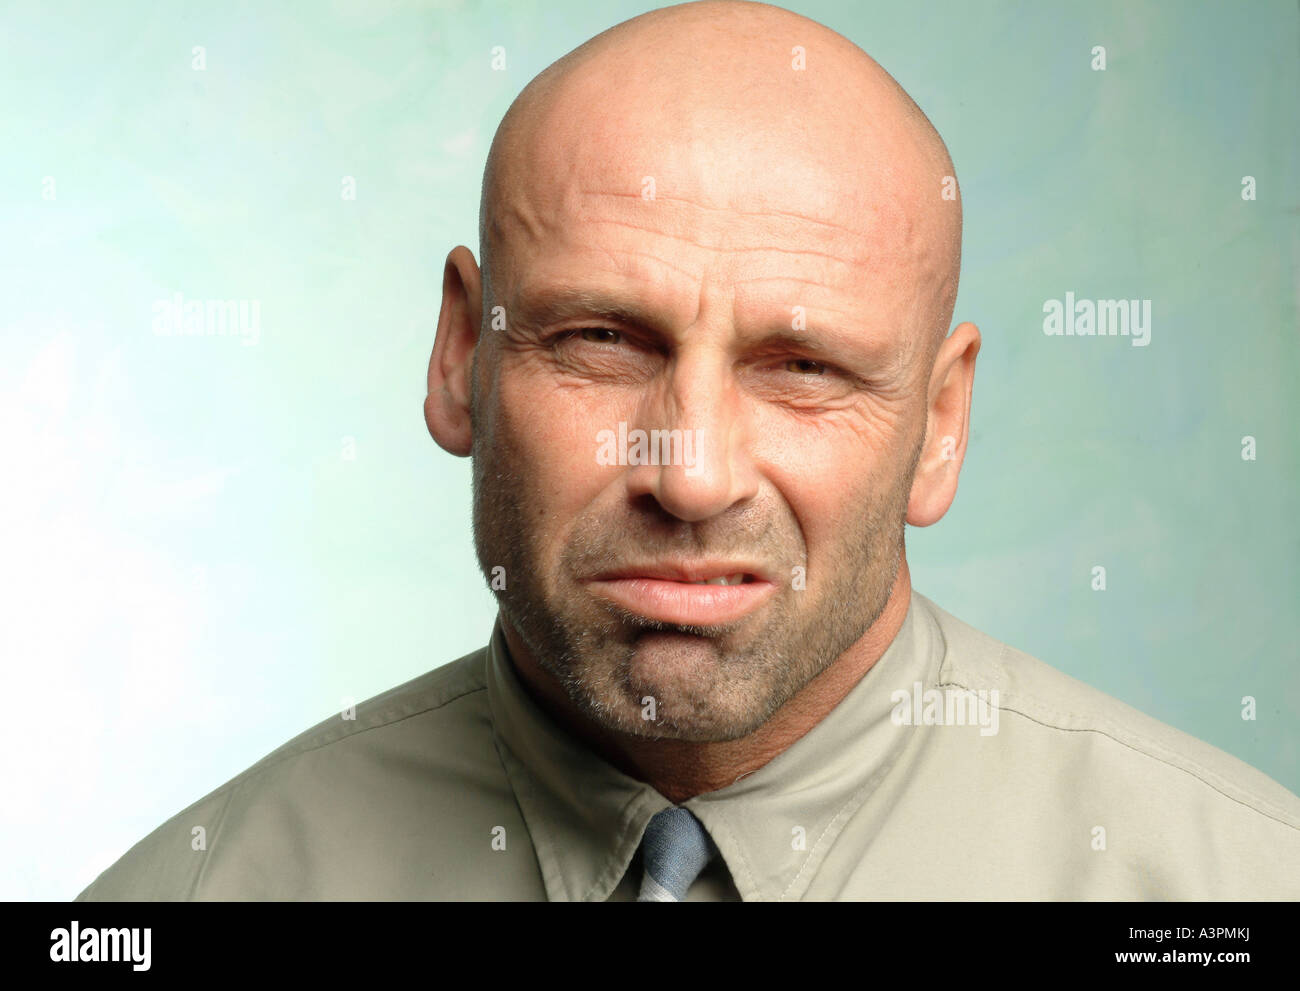 Man with a reluctant look on his face Stock Photo